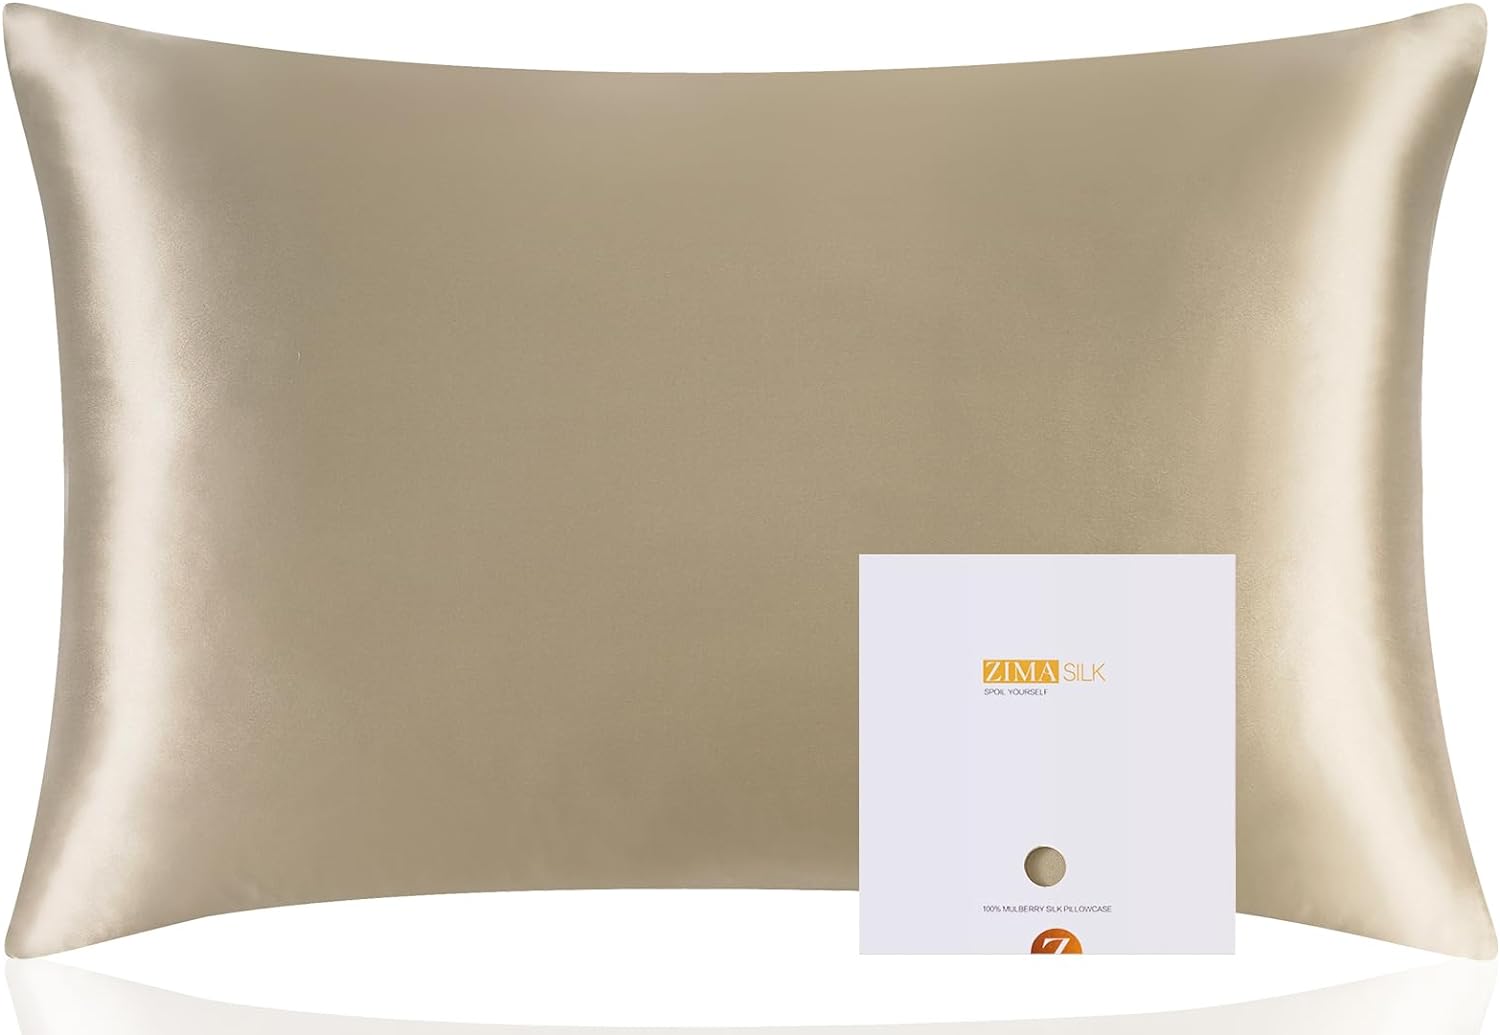 ZIMASILK 100% Pure Mulberry Silk Pillowcase for Hair and Skin Health,Soft and Smooth,Both Sides Premium Grade 6A Silk,600 Thread Count,with Hidden Zipper,1pc (Queen 20''x30'',Taupe)